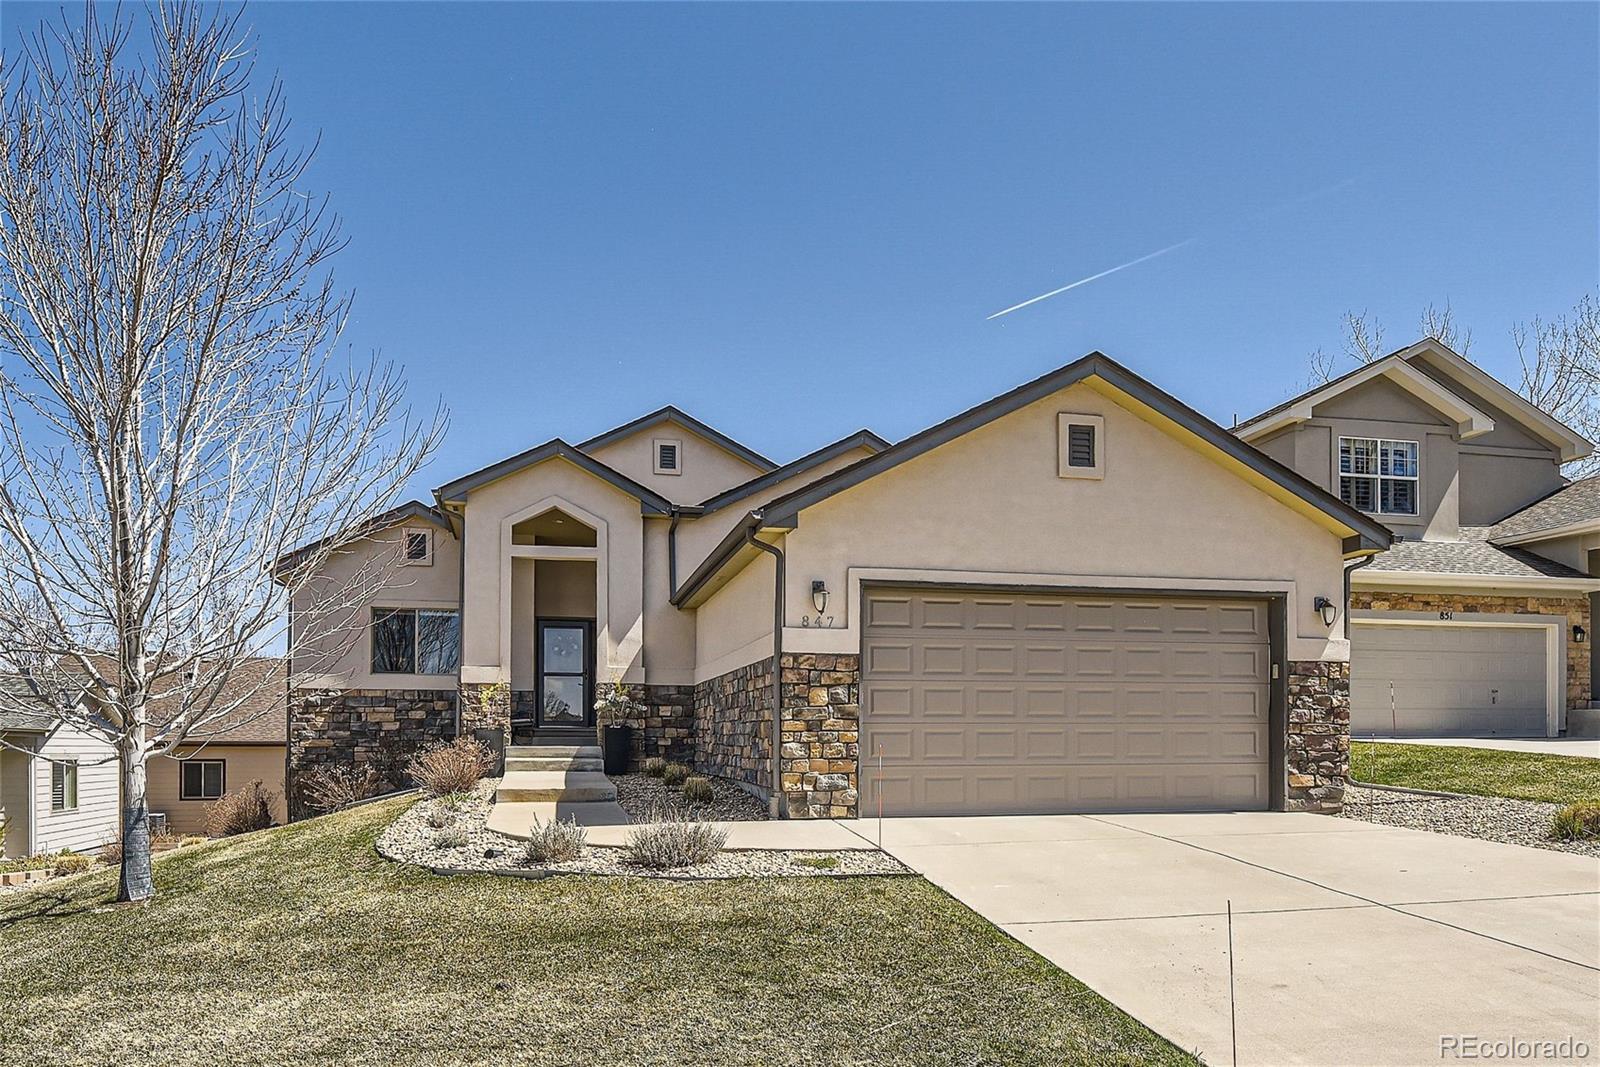 847  Stafford Circle, castle rock MLS: 4088069 Beds: 4 Baths: 3 Price: $678,000